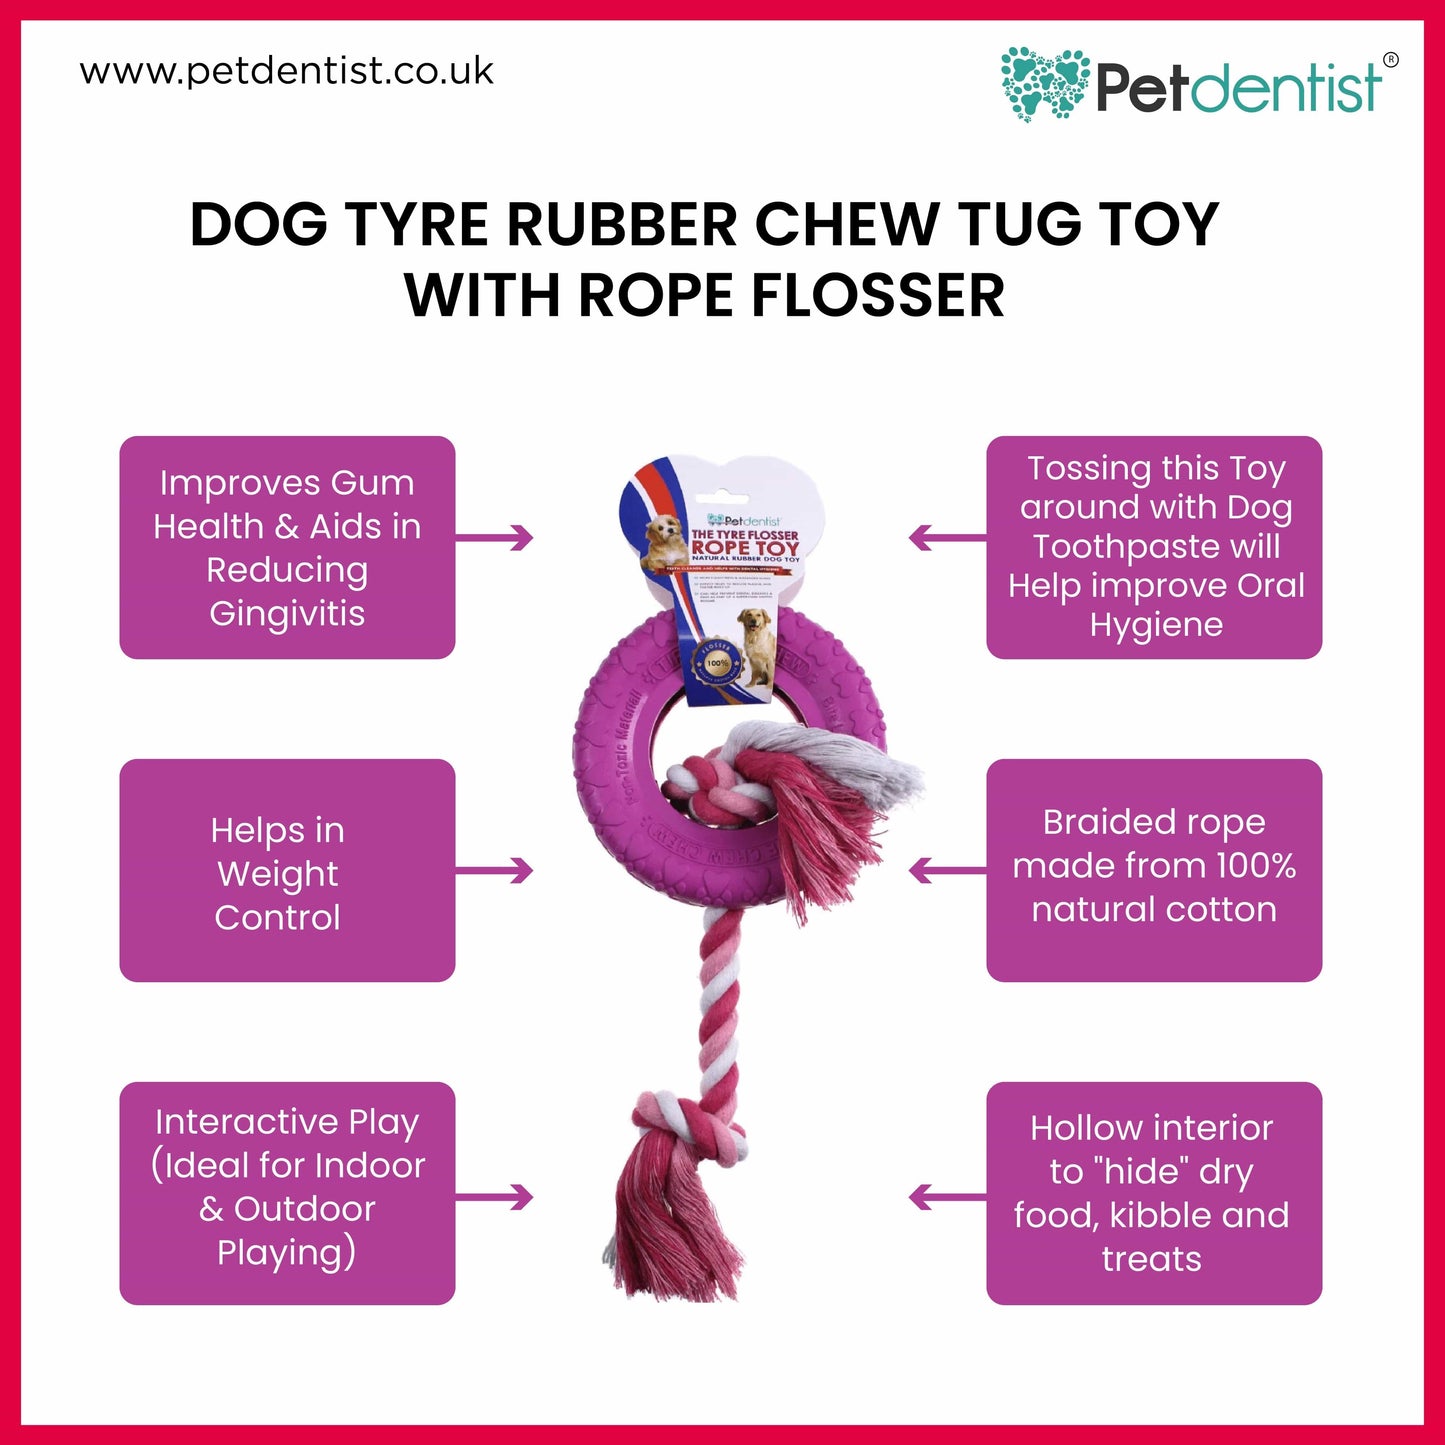 Dog Tyre Rubber Chew Tug Toy with Rope Flosser – Pink - Petdentist